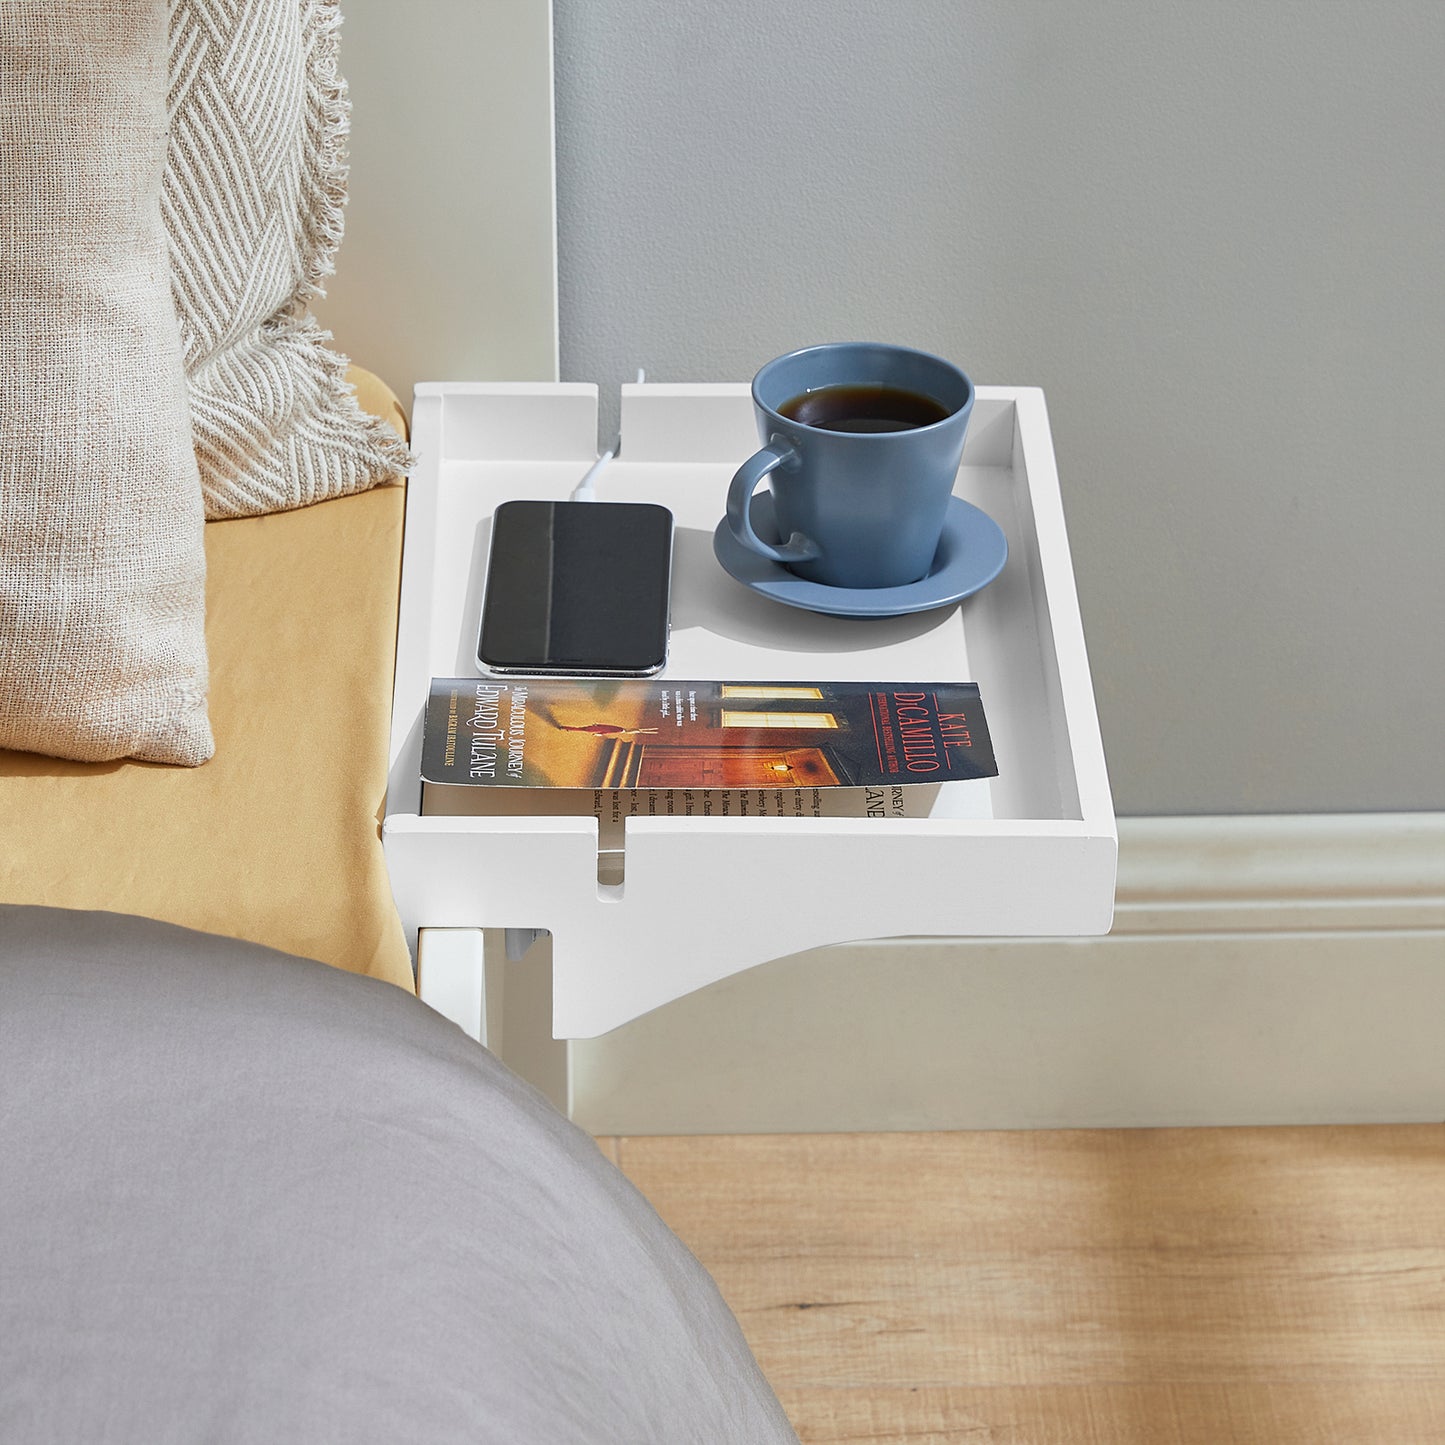 SoBuy Bedside Shelf Clip-on Hanging Shelf Bed Side Shelf Table Nightstand Tray with 2 Wire Slots